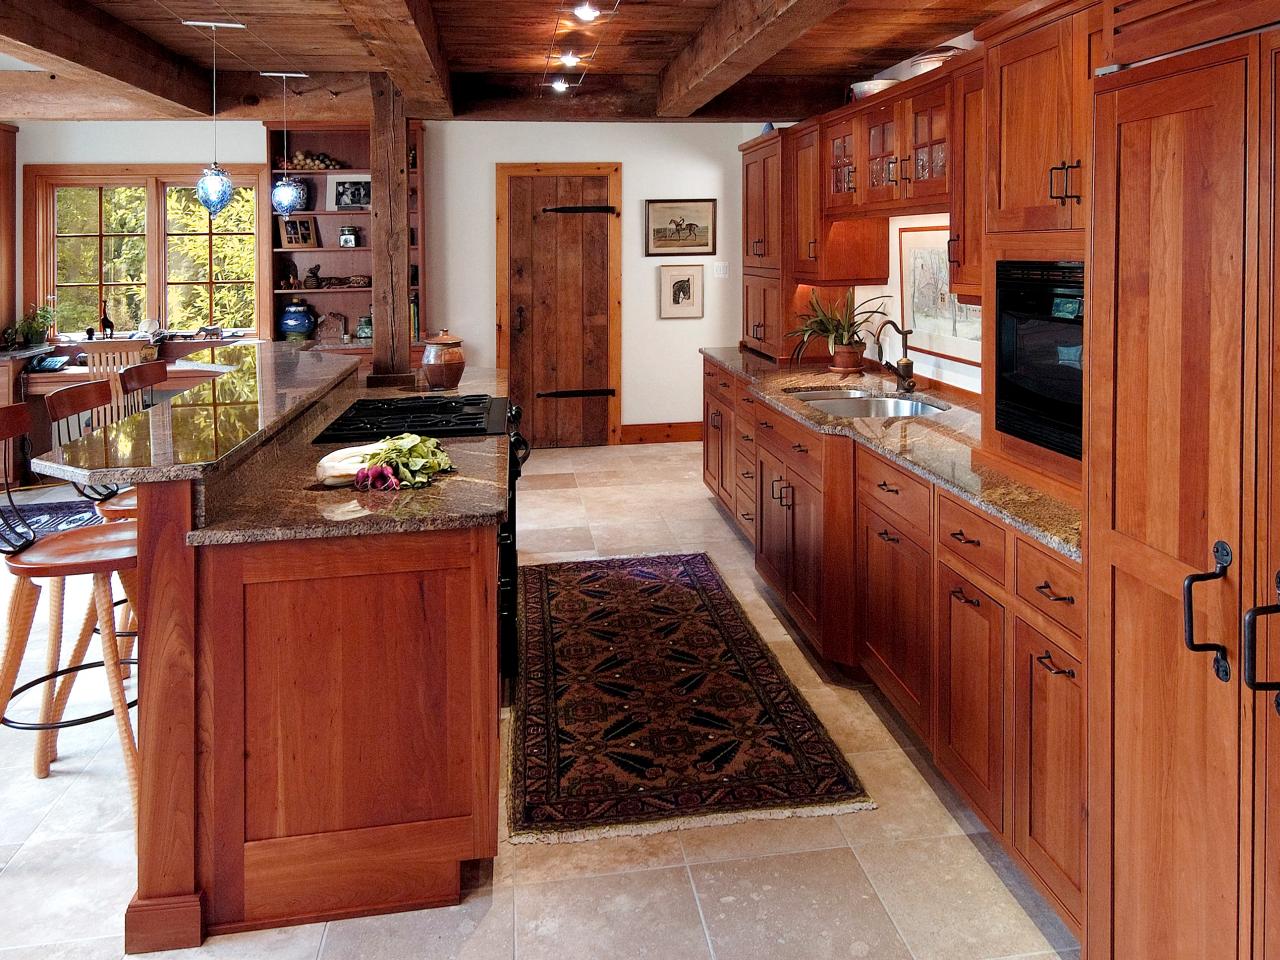 Professional Chefs, Log Cabin Kitchen Cabinets In Natural Cherry